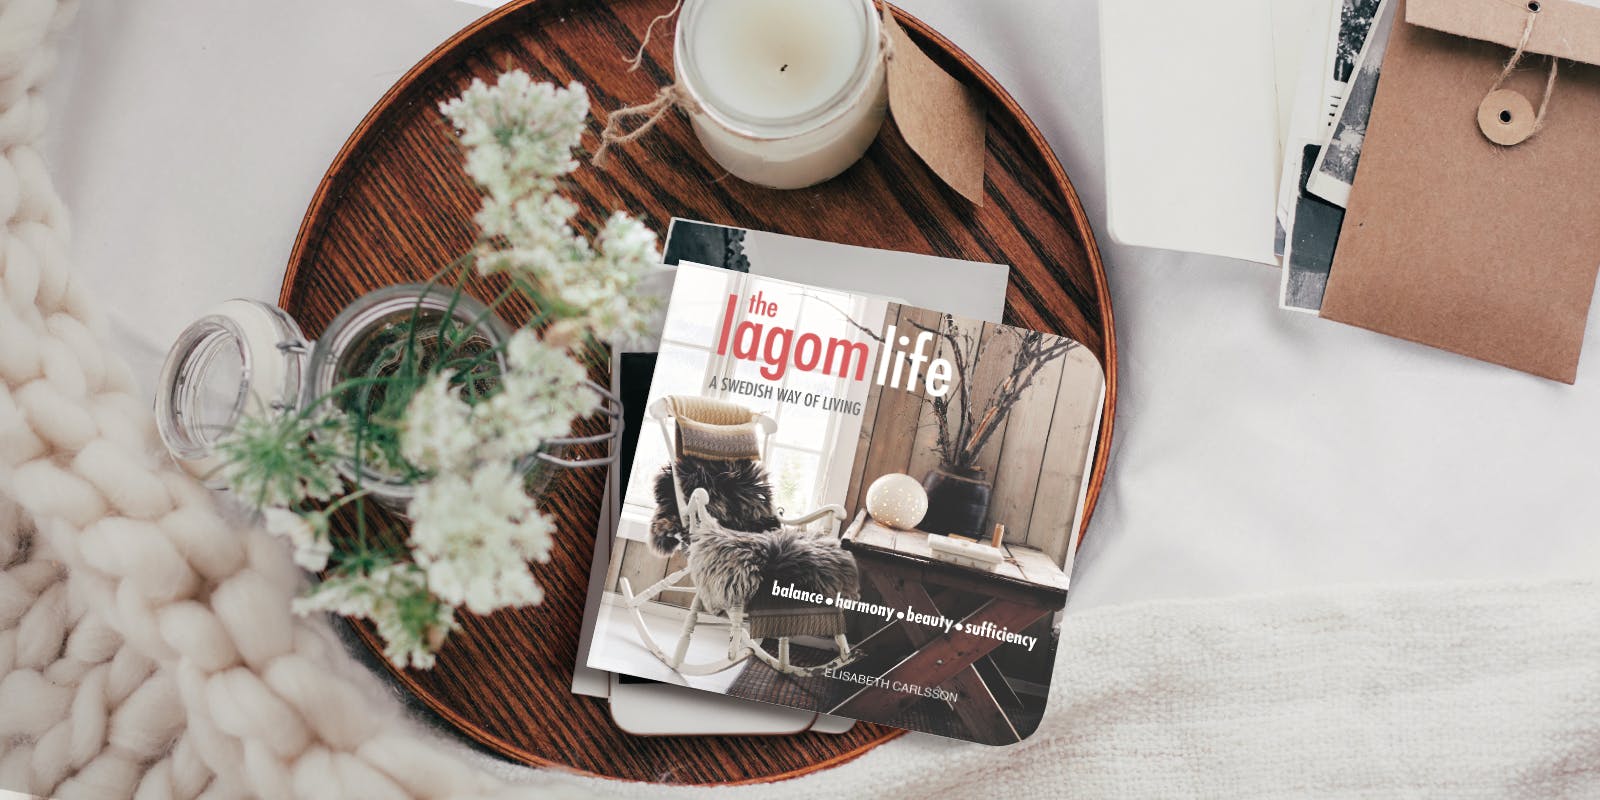 Give yourself a lagom time out